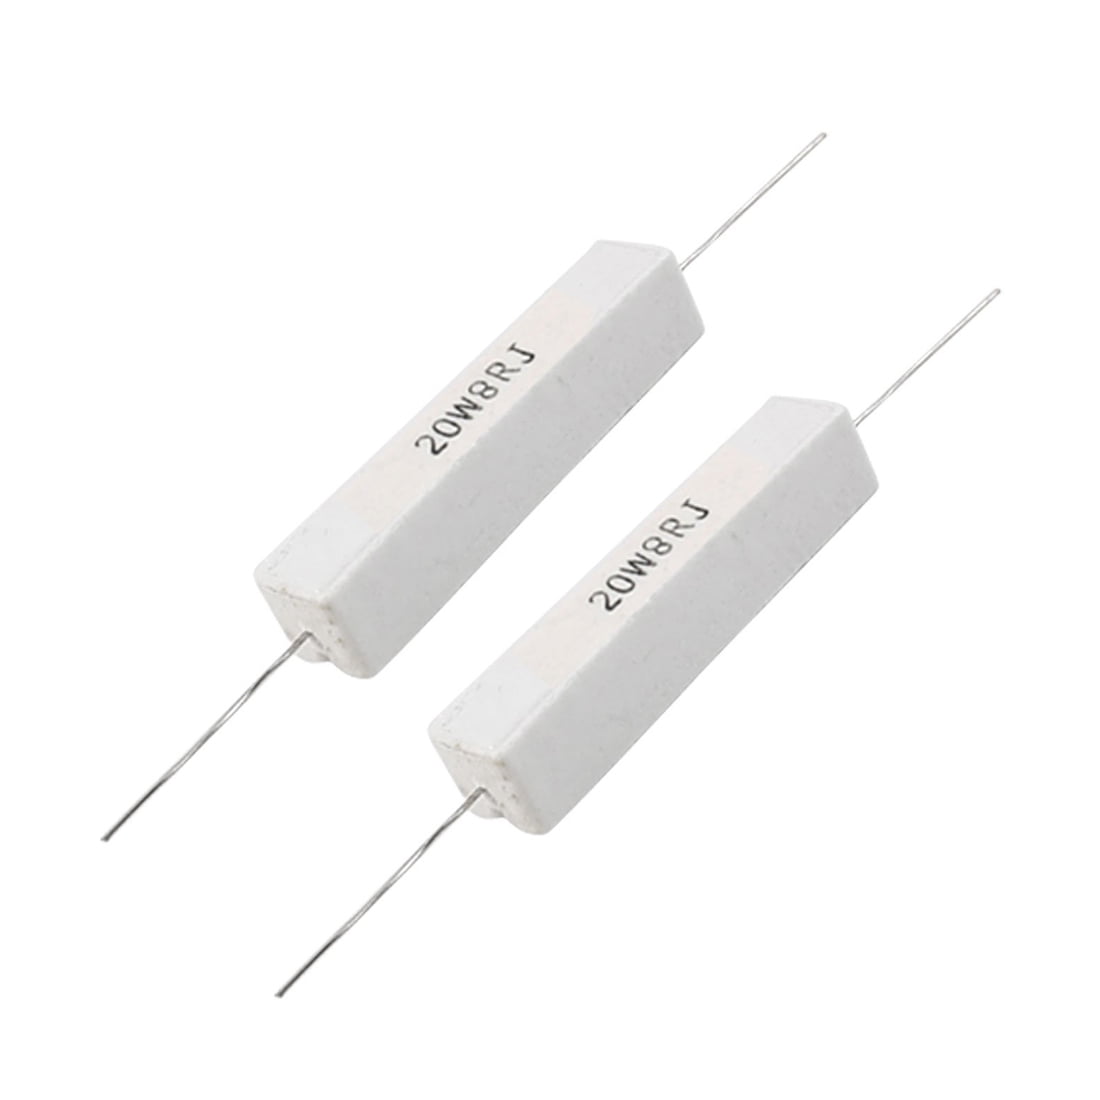 20W ±5% High Accuracy Cement Resistance for Printed Circuit Board Printed Circuit Board Components 10Pcs Cement Power Resistor 1KR